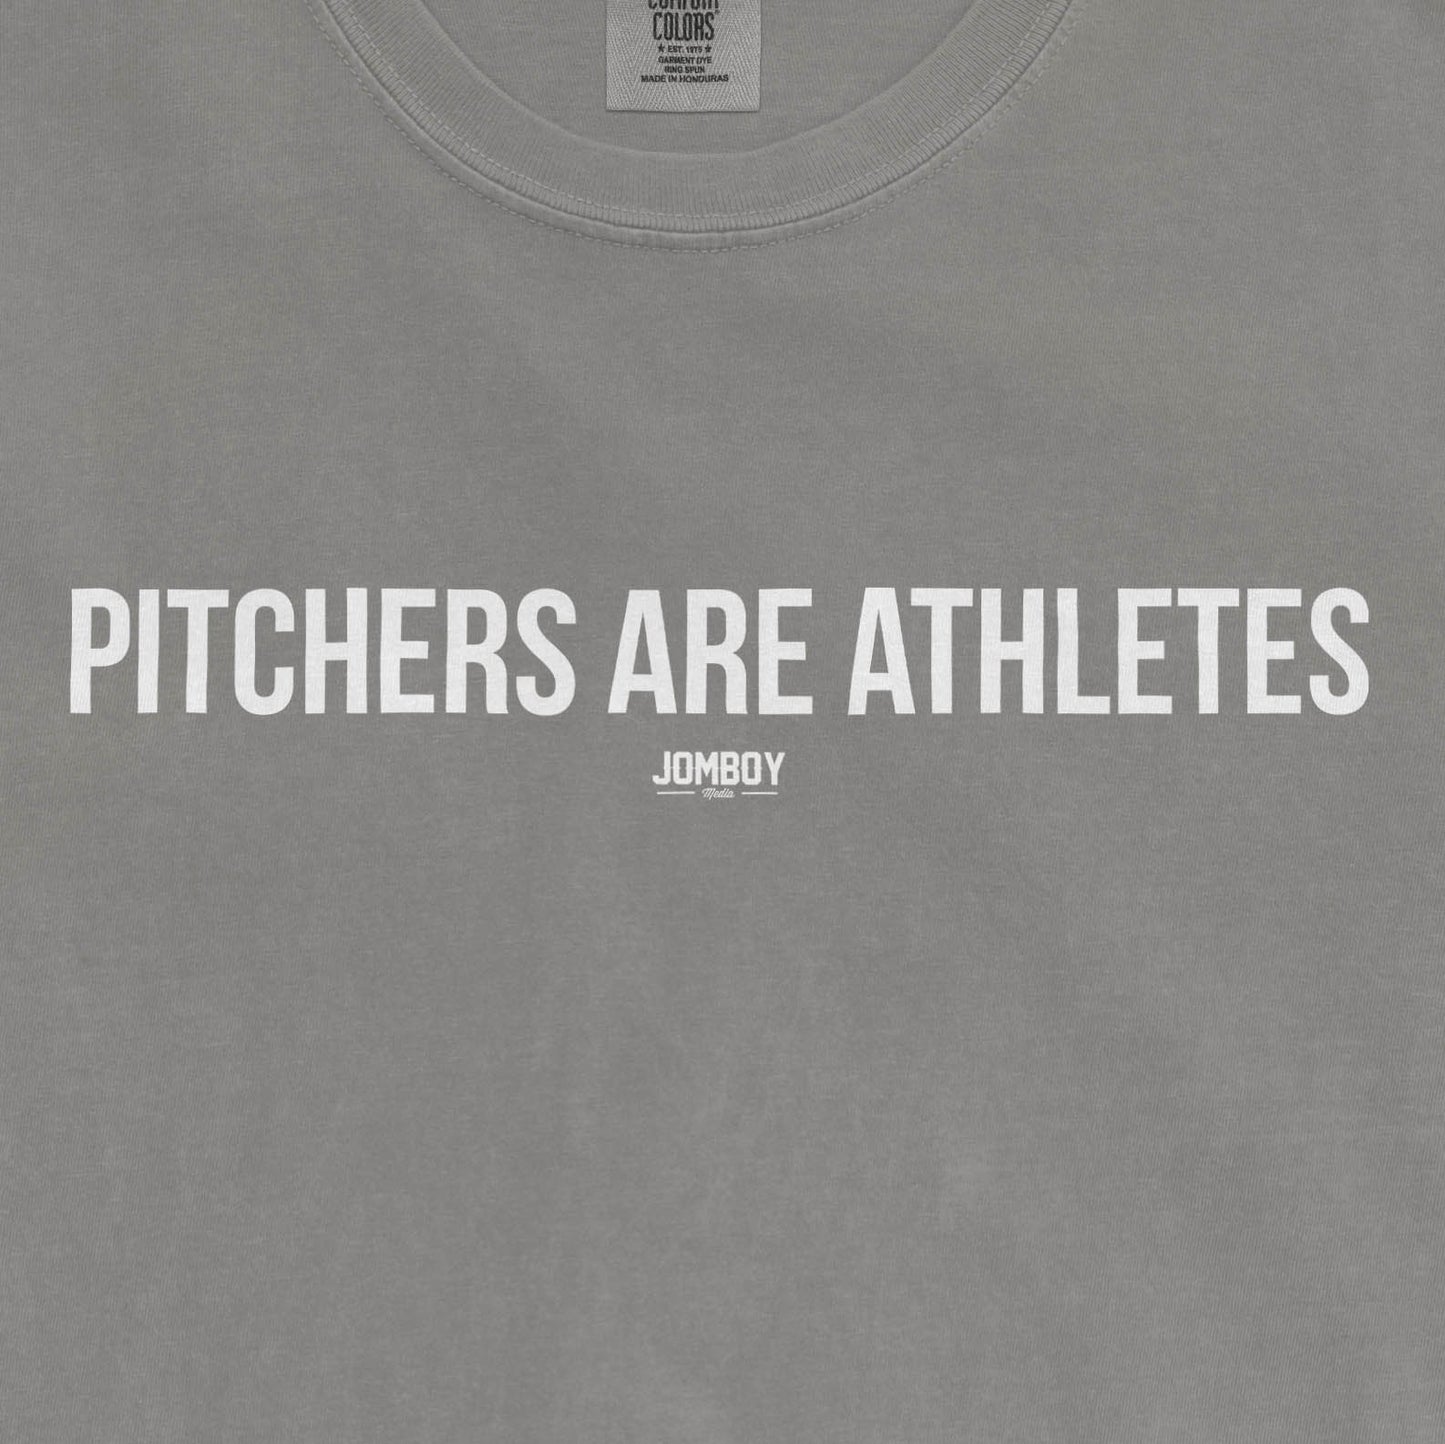 PITCHERS ARE ATHLETES | COMFORT COLORS® VINTAGE TEE